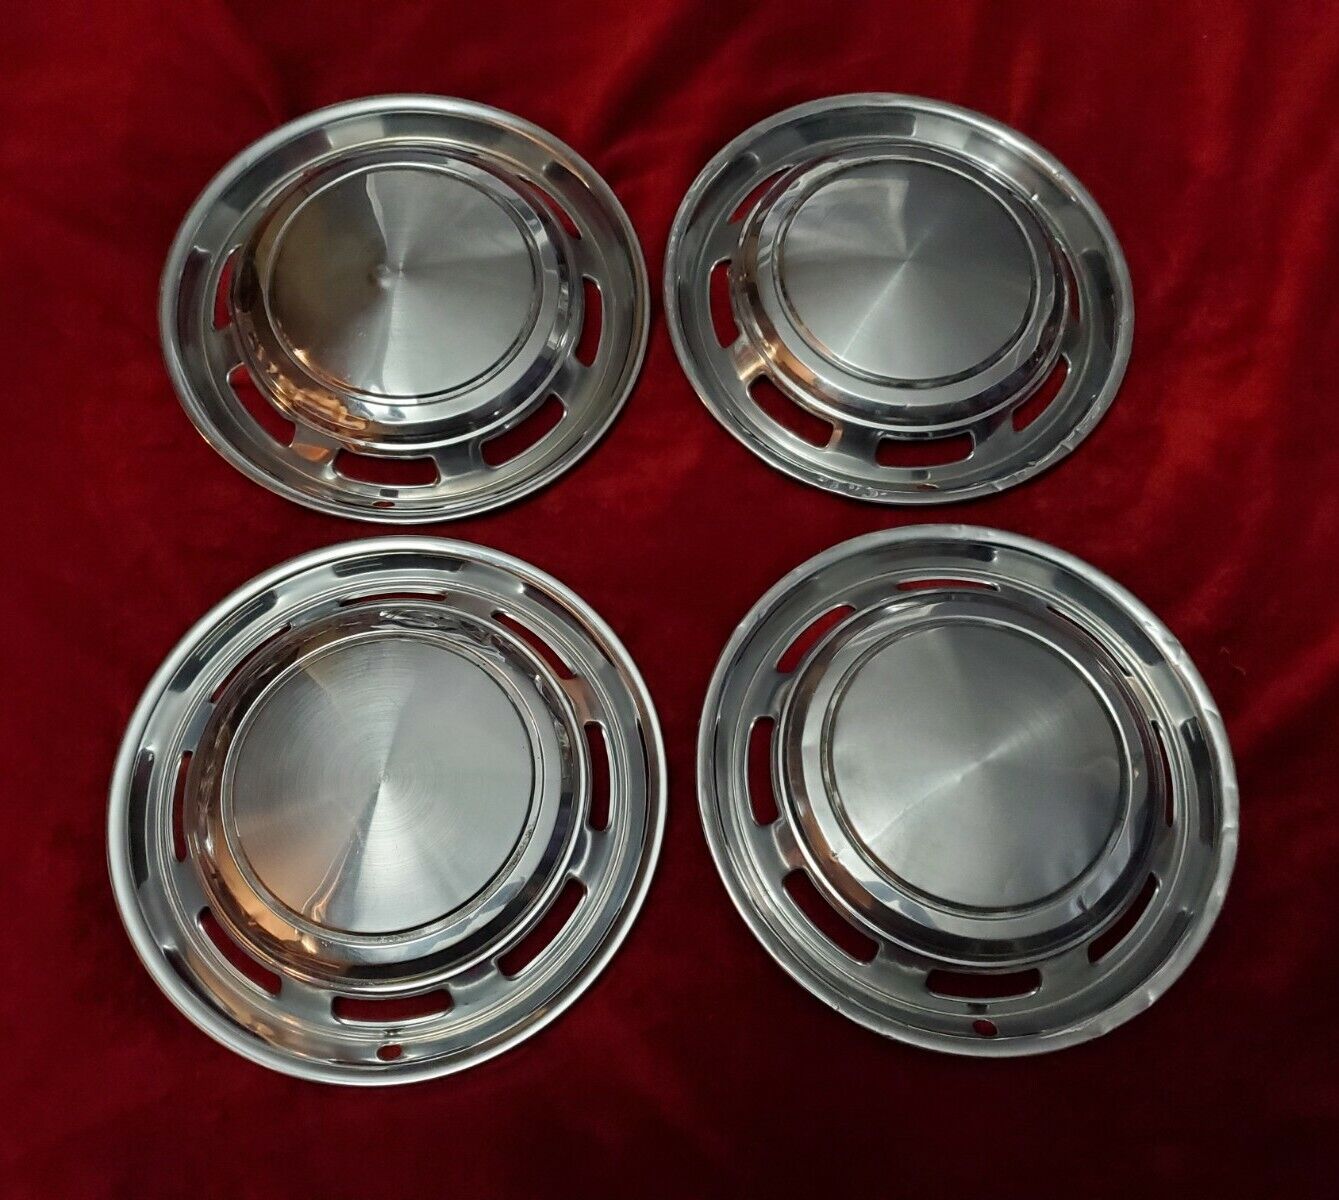 1971 Ford Pinto Hubcaps 1972 Bobcat Wheel Covers 1973 1974 1975 1976 1977 1978